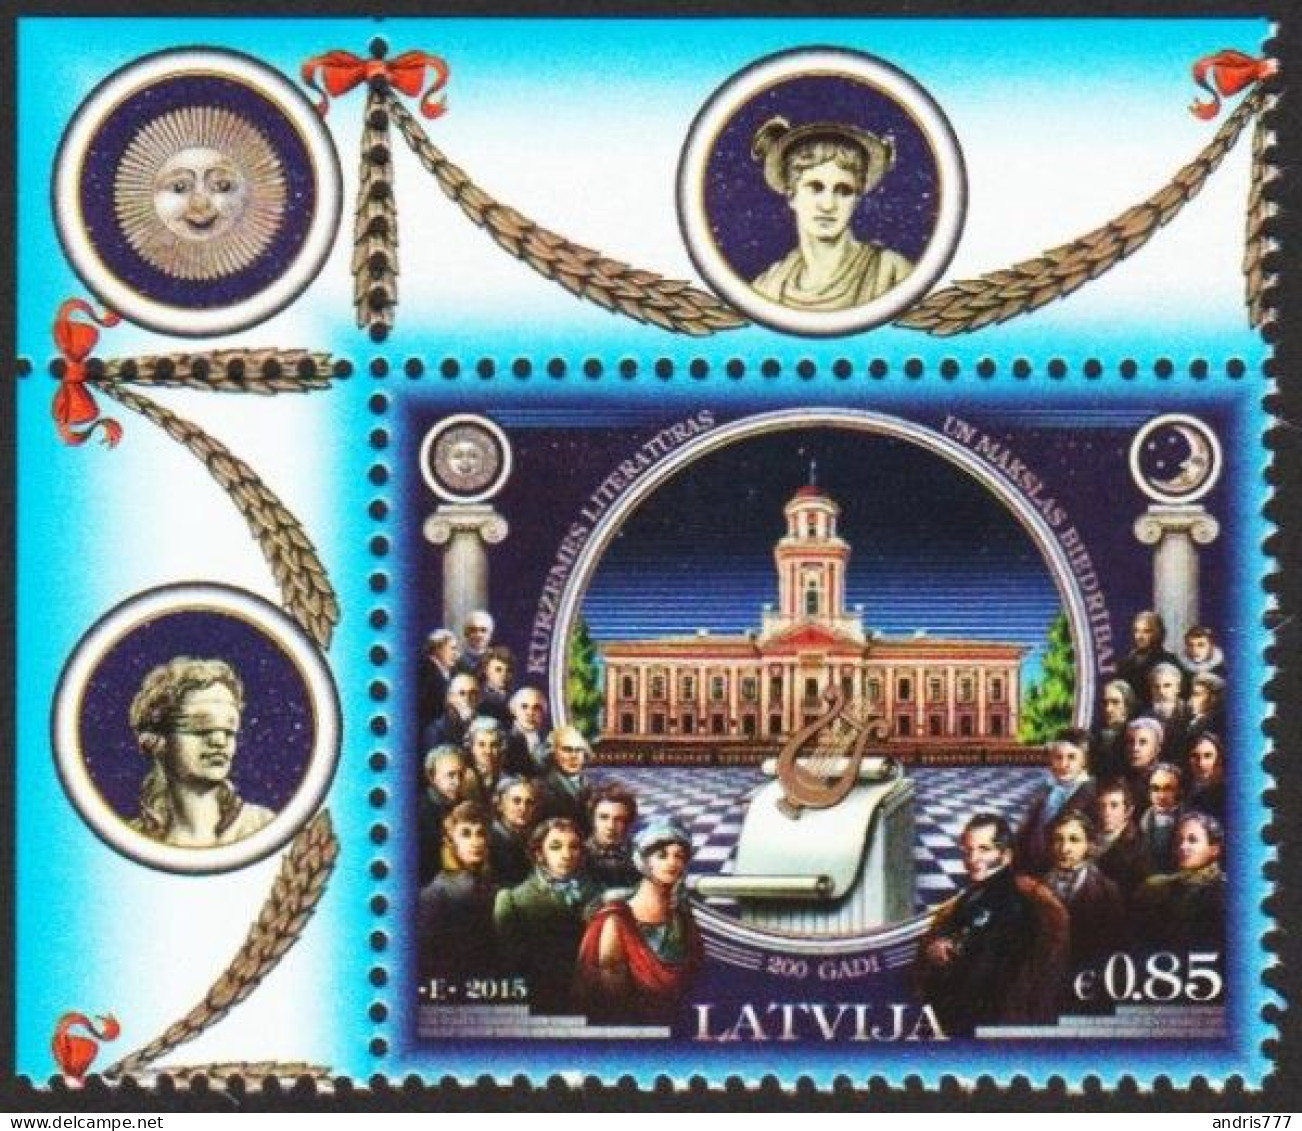 Latvia Lettland Lettonie 2015 (09) Courland Society For Literature And Art - 200 Years (corner) - Letonia